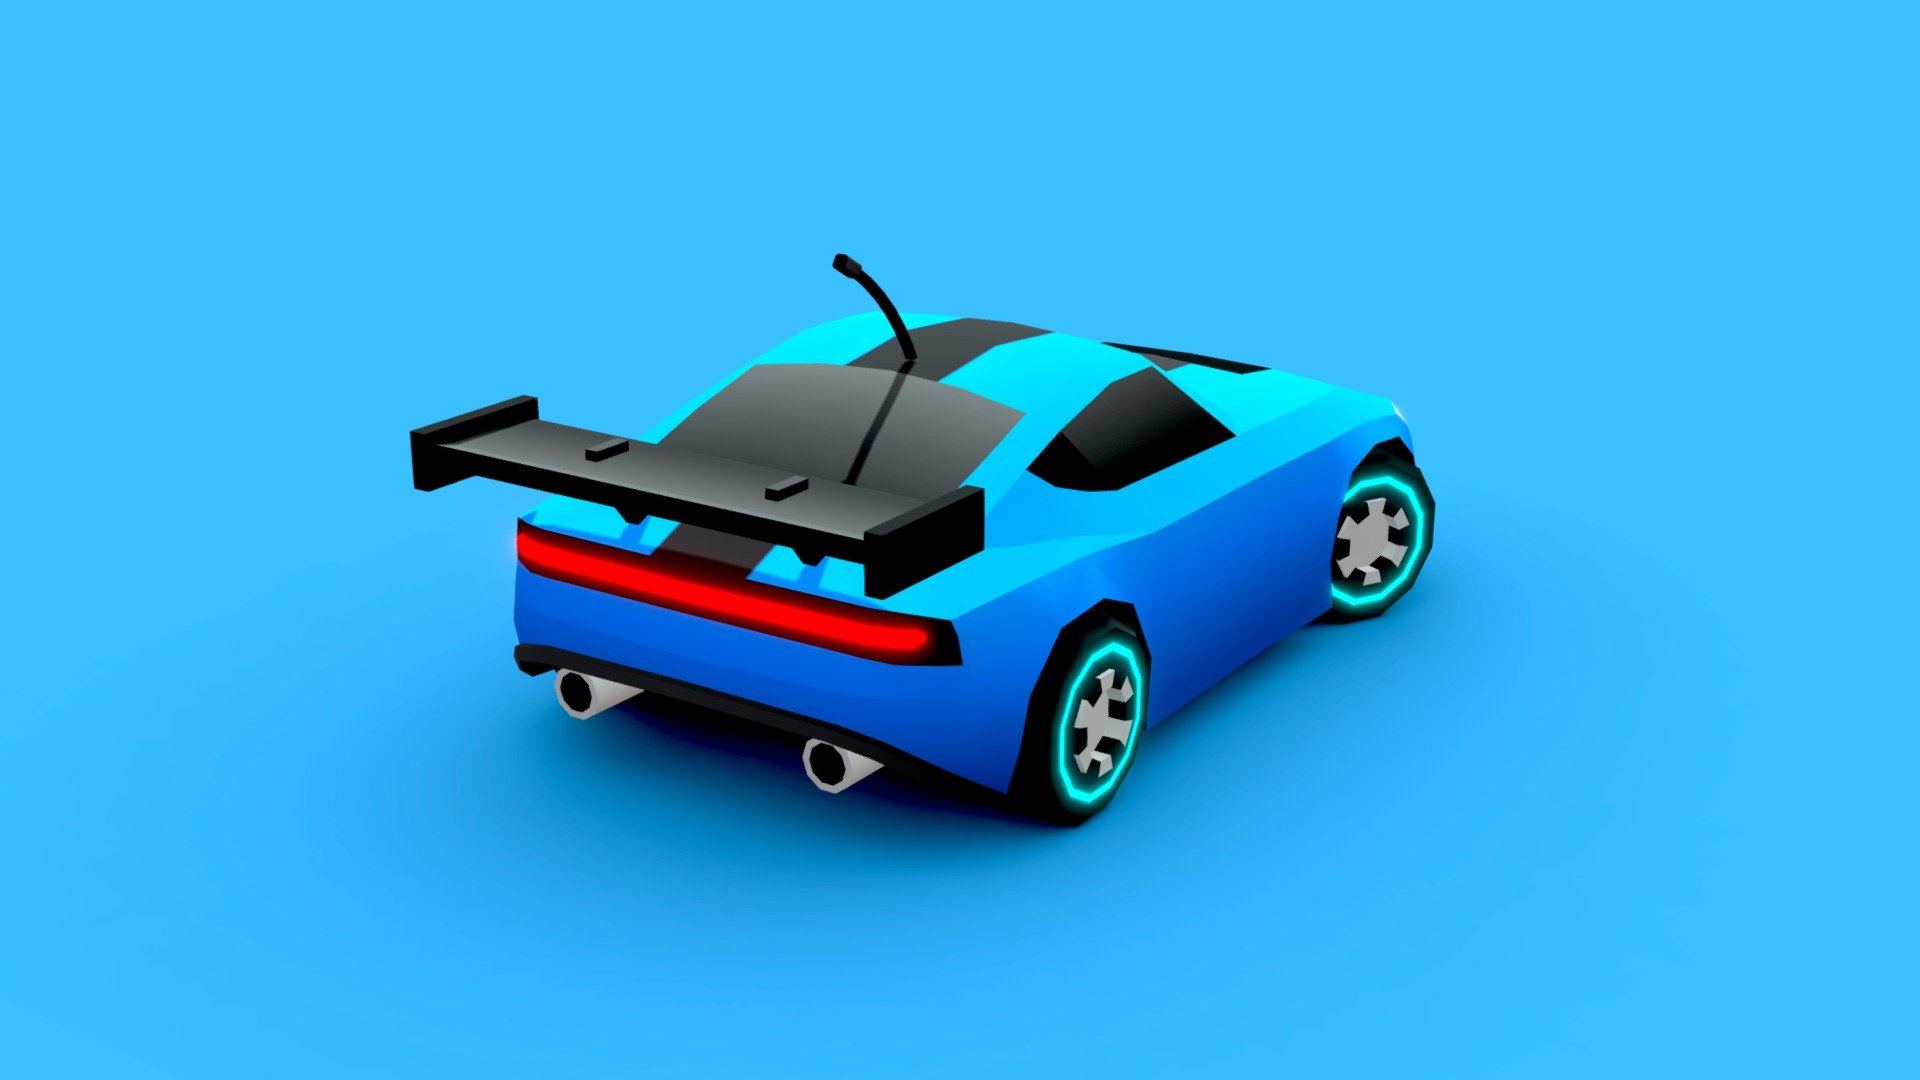 This is &lsquo;Pioneer', the racing car #2 that is going to be included in my next asset. It will include racing tracks, props and vehicles with cartoon proportions! 3d model